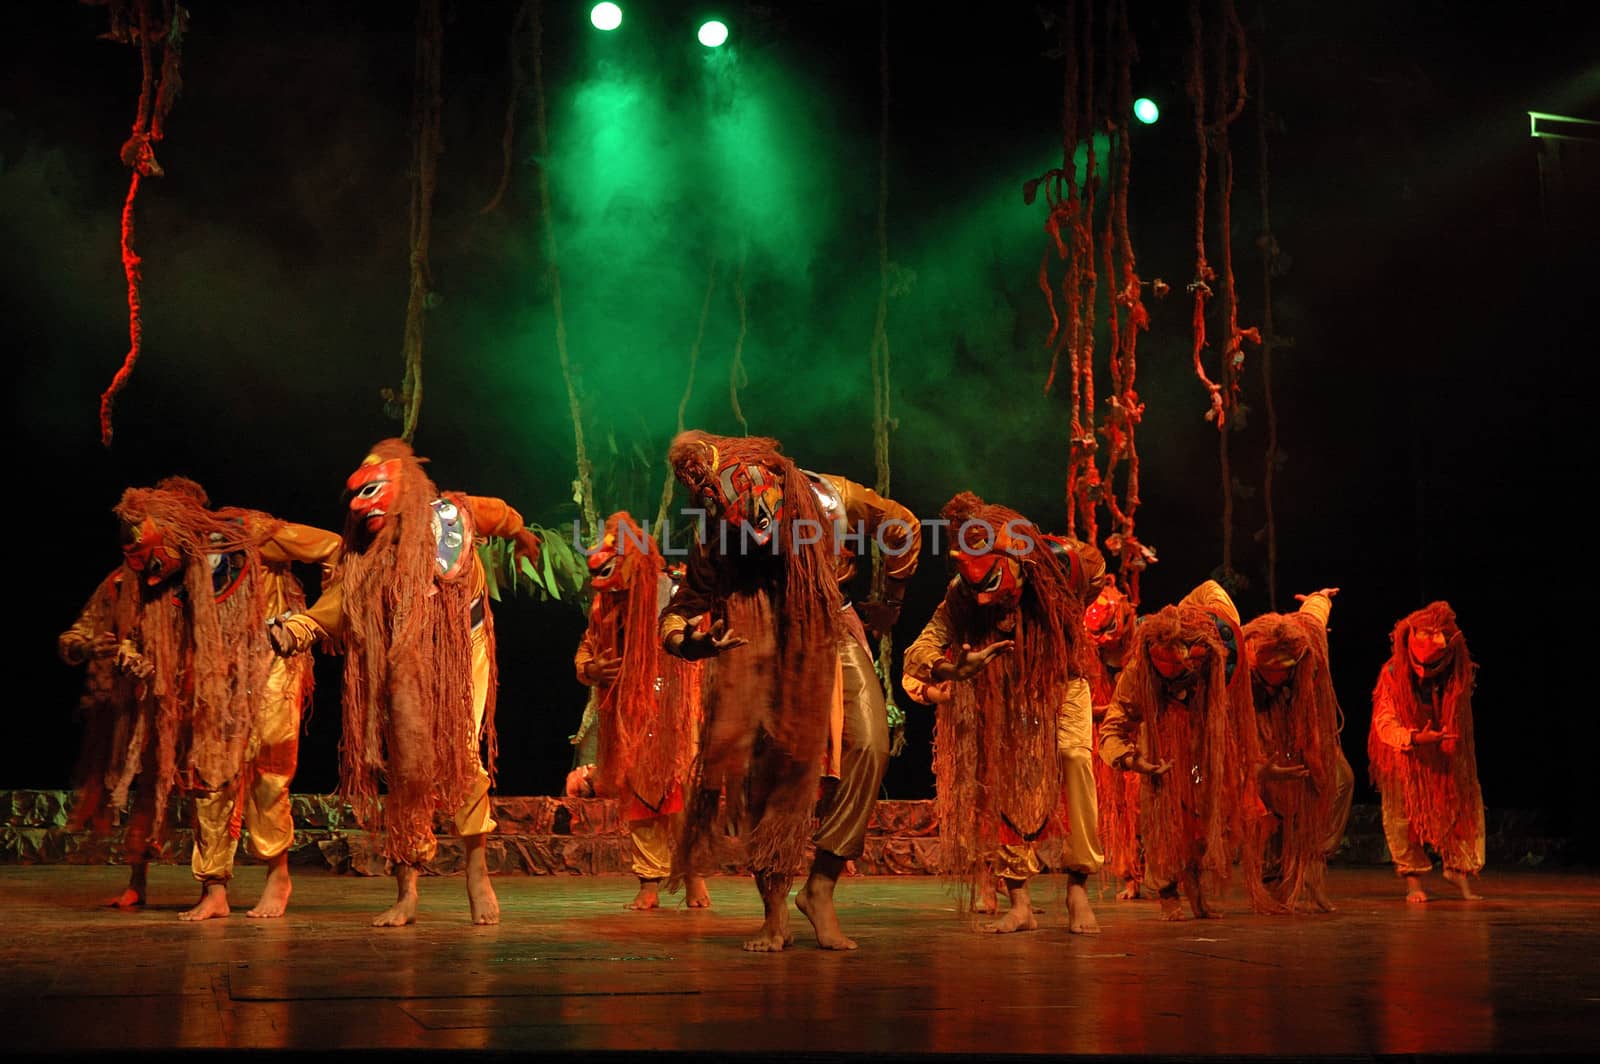 Sangkuriang theatrical show by bluemarine